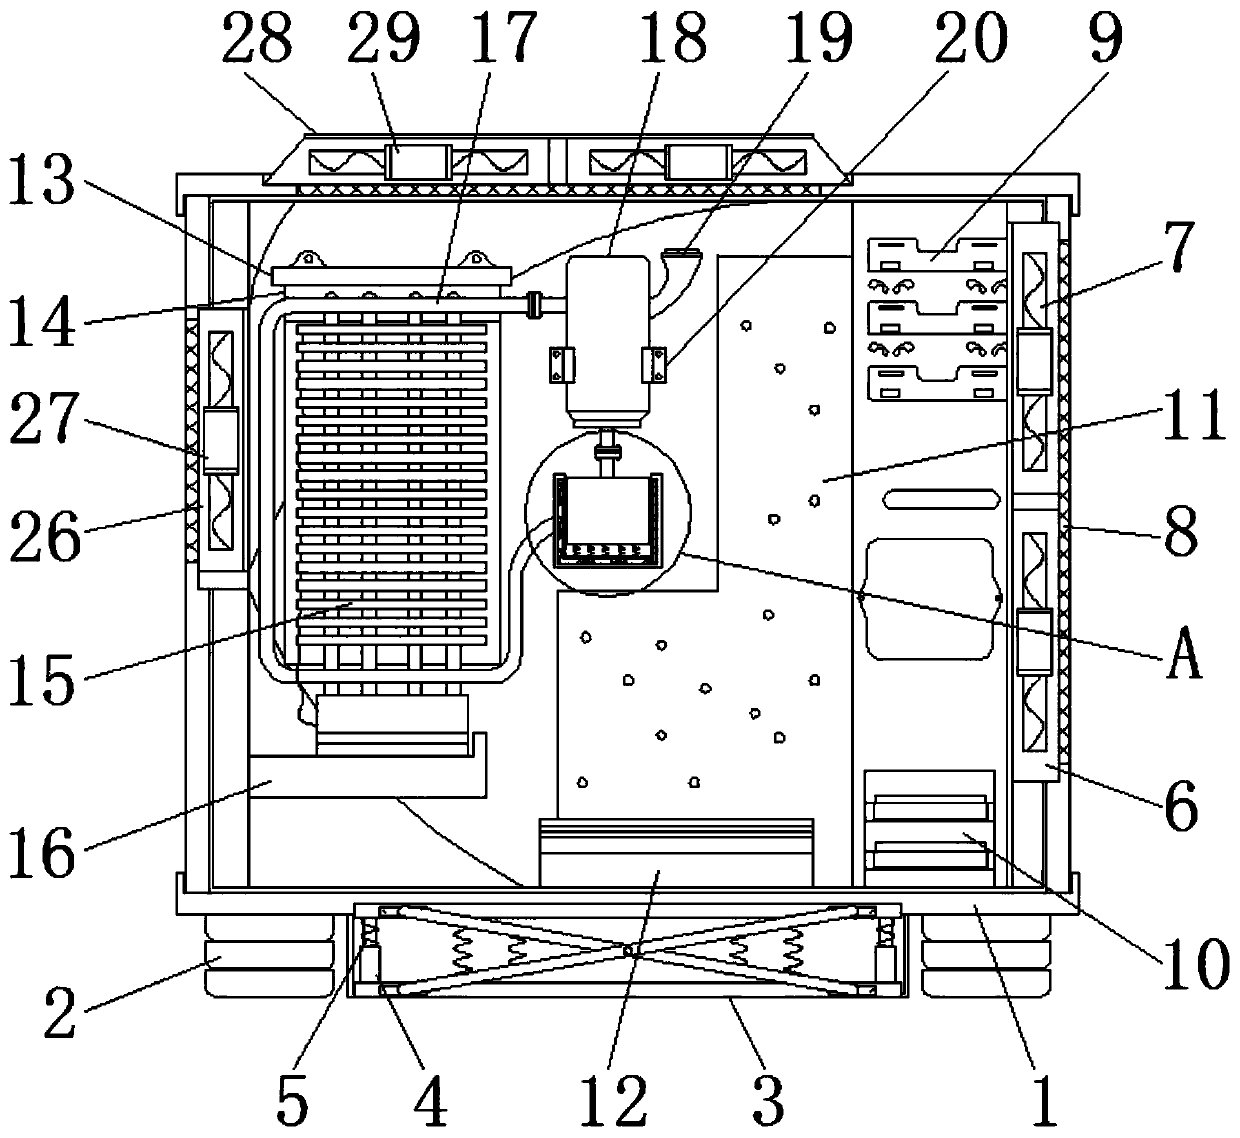 An air-cooling and water-cooling hybrid heat dissipation case